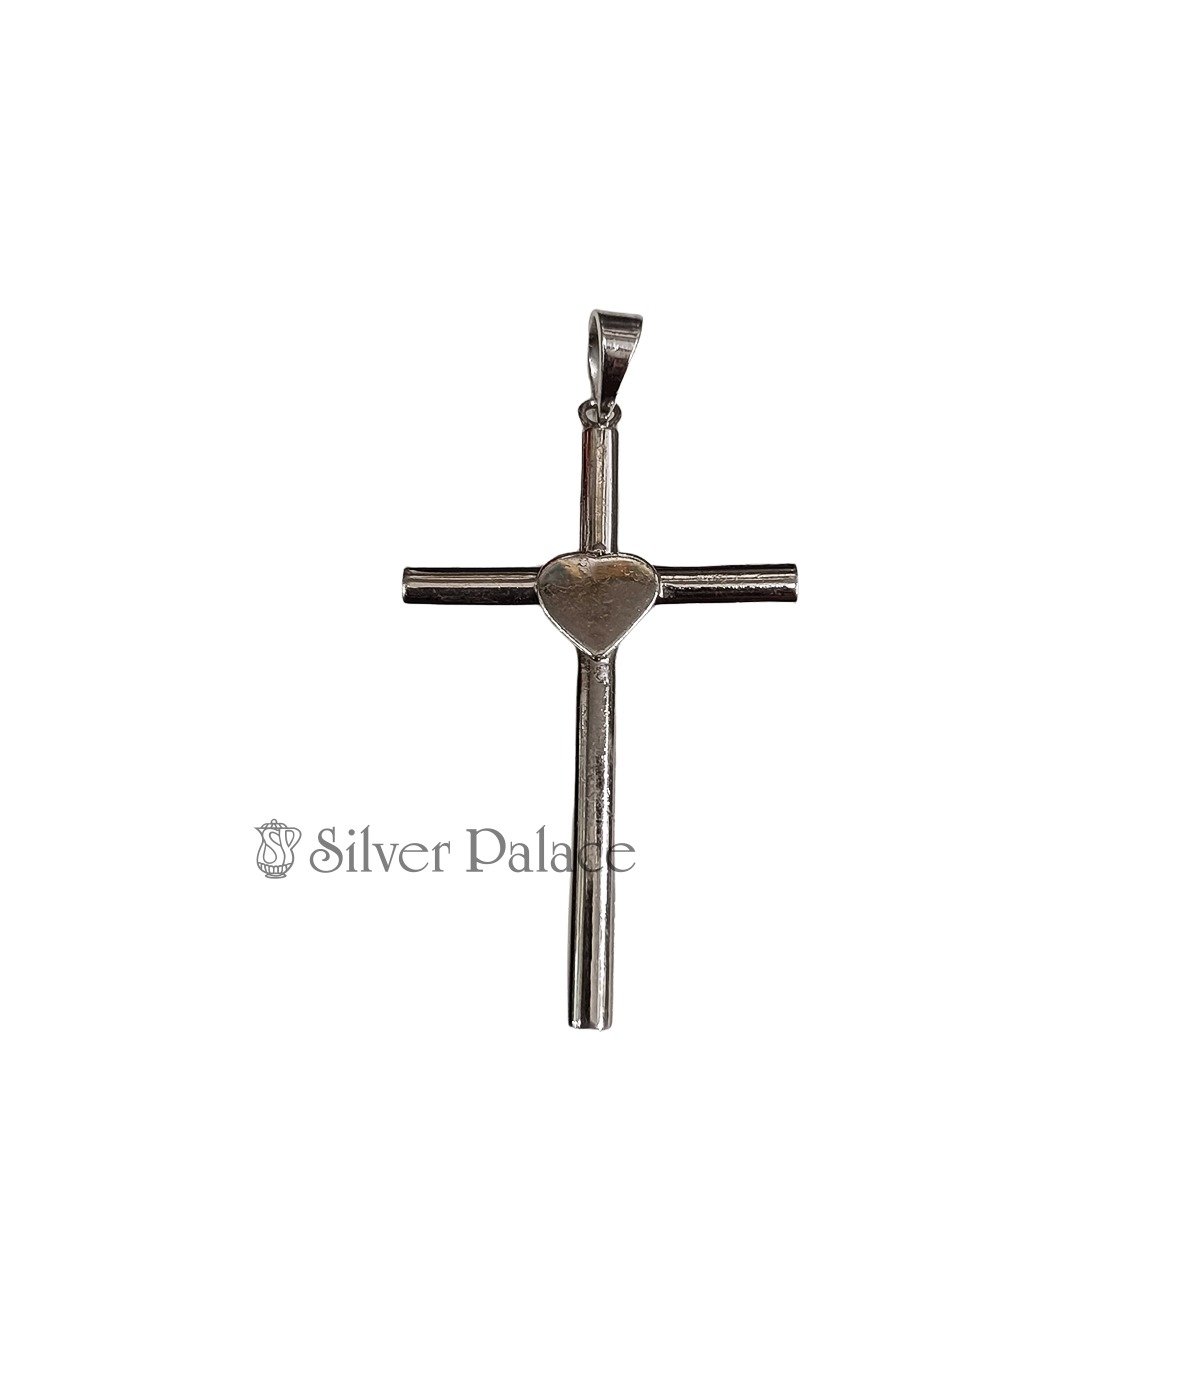 92.5 STERLING SILVER CROSS PENDANT WITH HEART CENTER